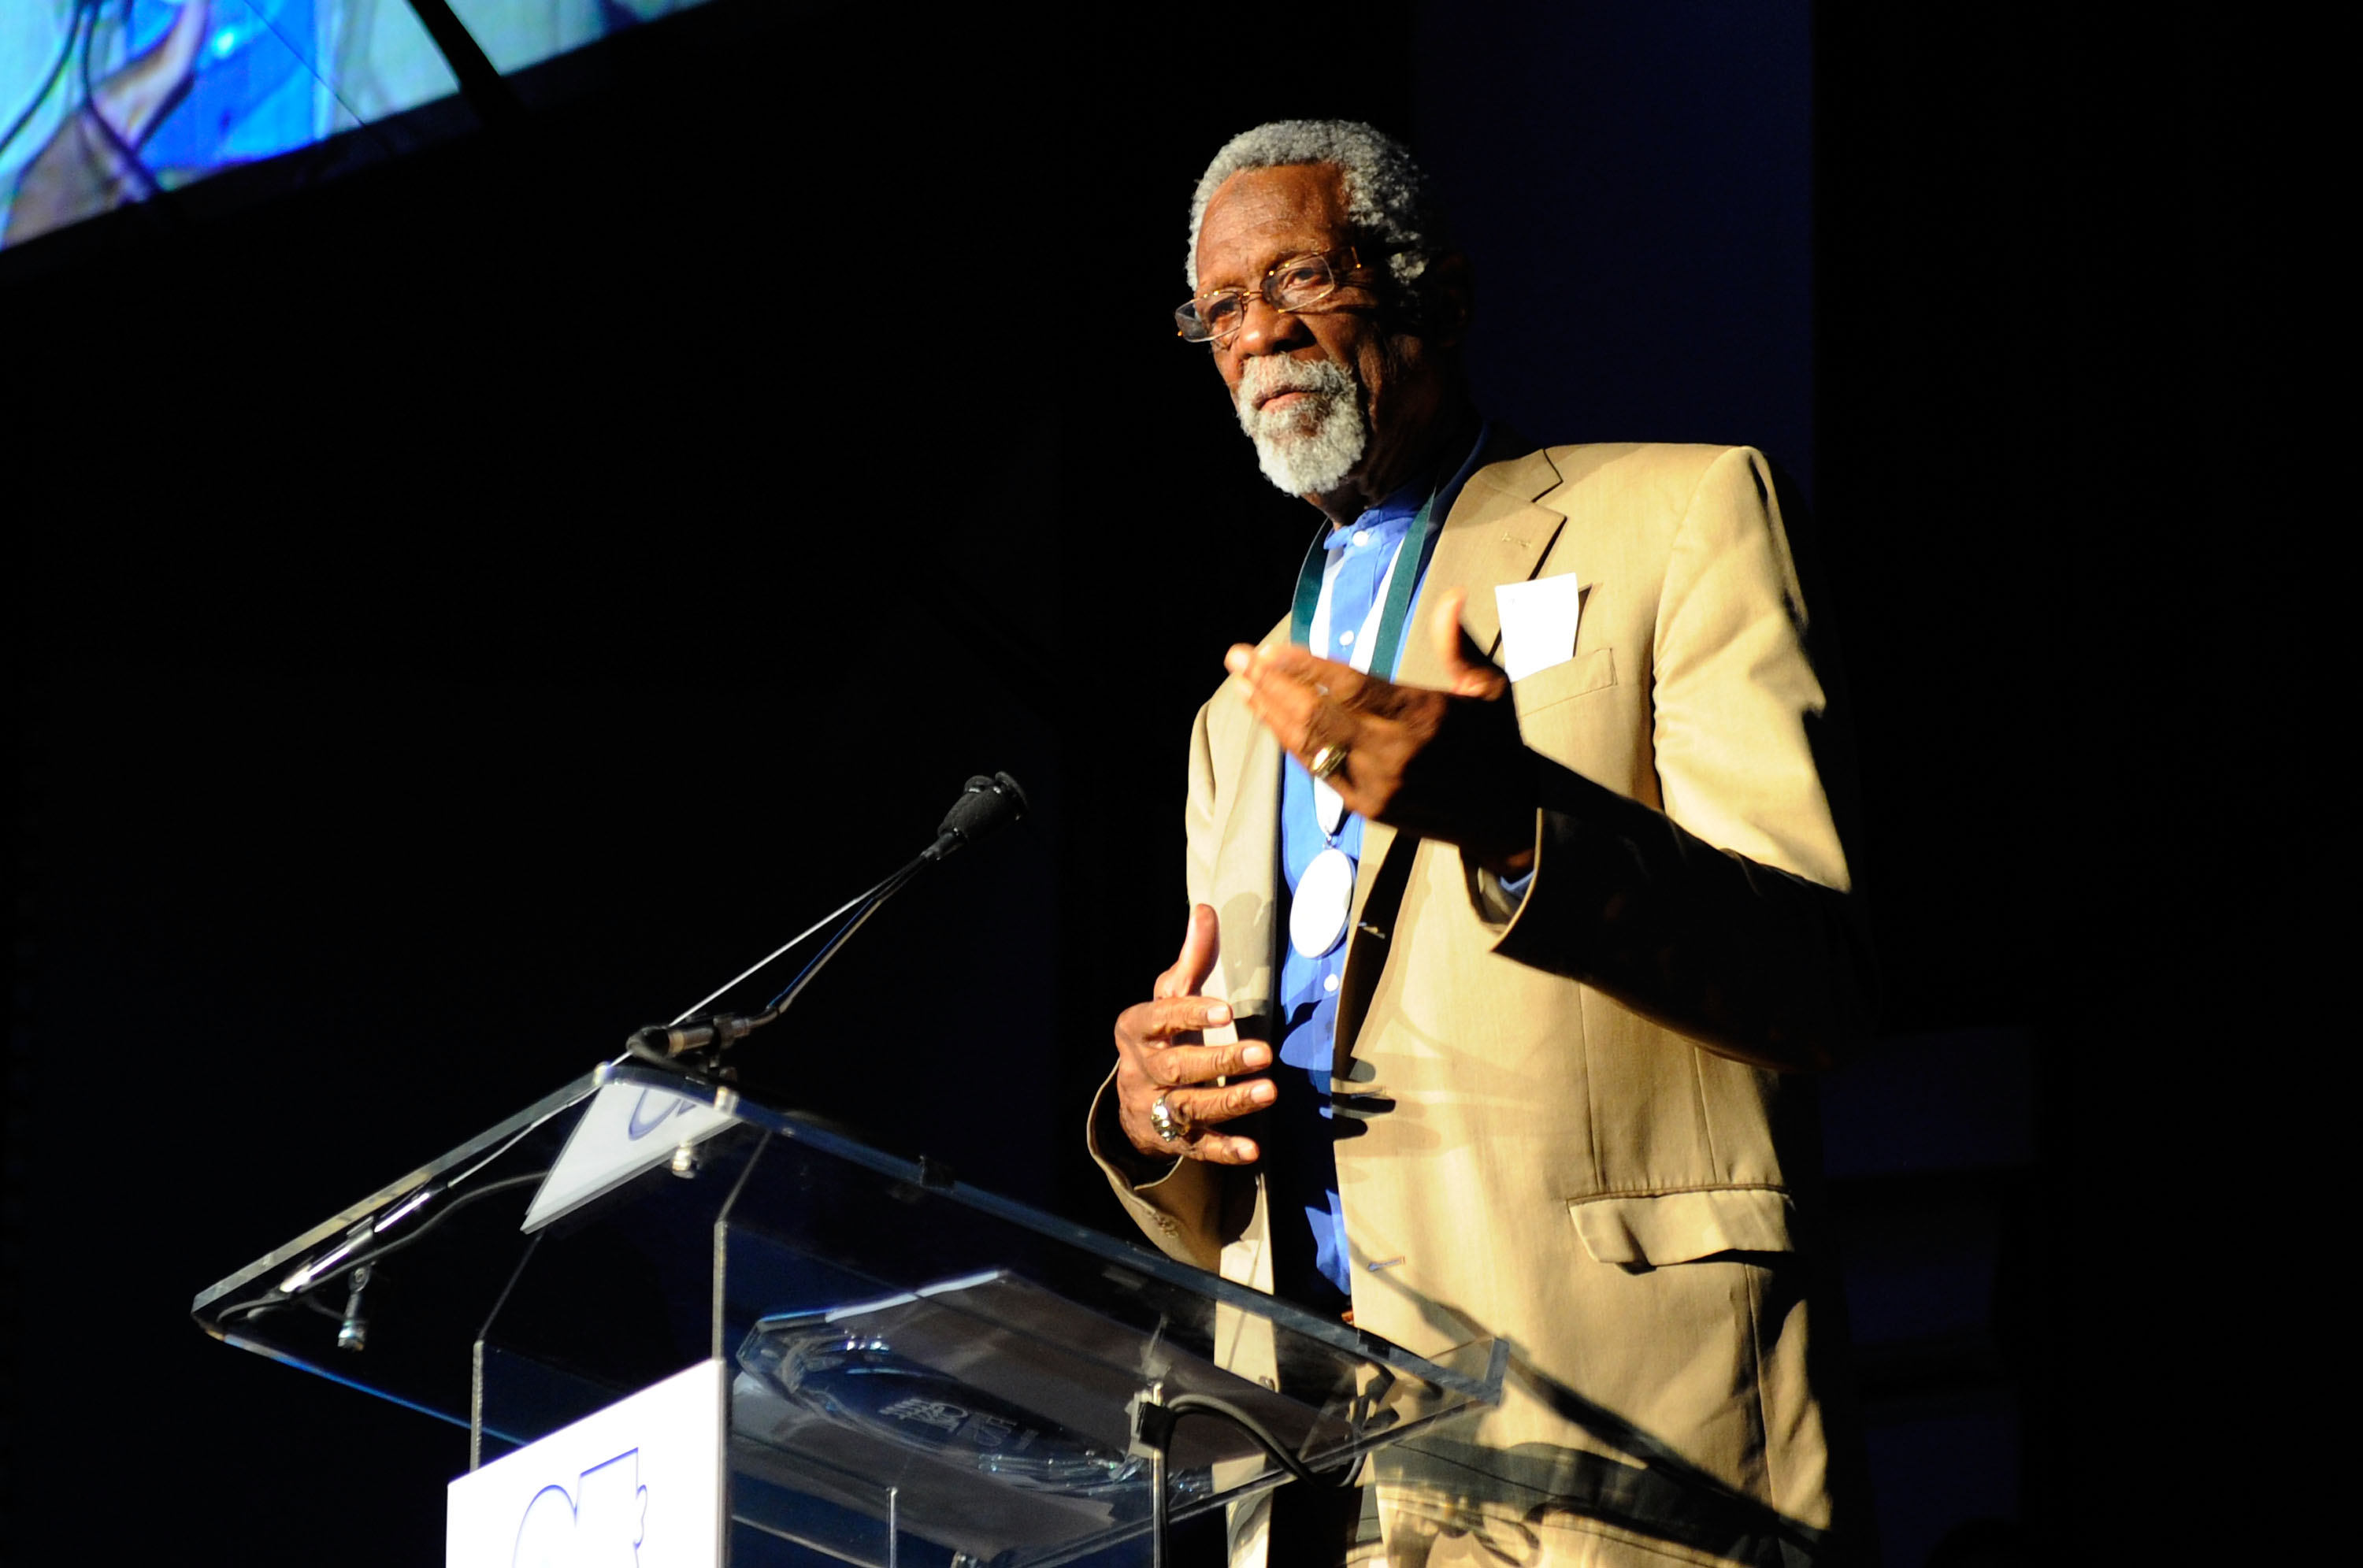 NEW YORK - SEPTEMBER 27:  2010 Honoree and former NBA player Bill Russell speaks during the 25th Great Sports Legends Dinner to benefit The Buoniconti Fund to Cure Paralysis at The Waldorf=Astoria on September 27, 2010 in New York City.  (Photo by Andrew